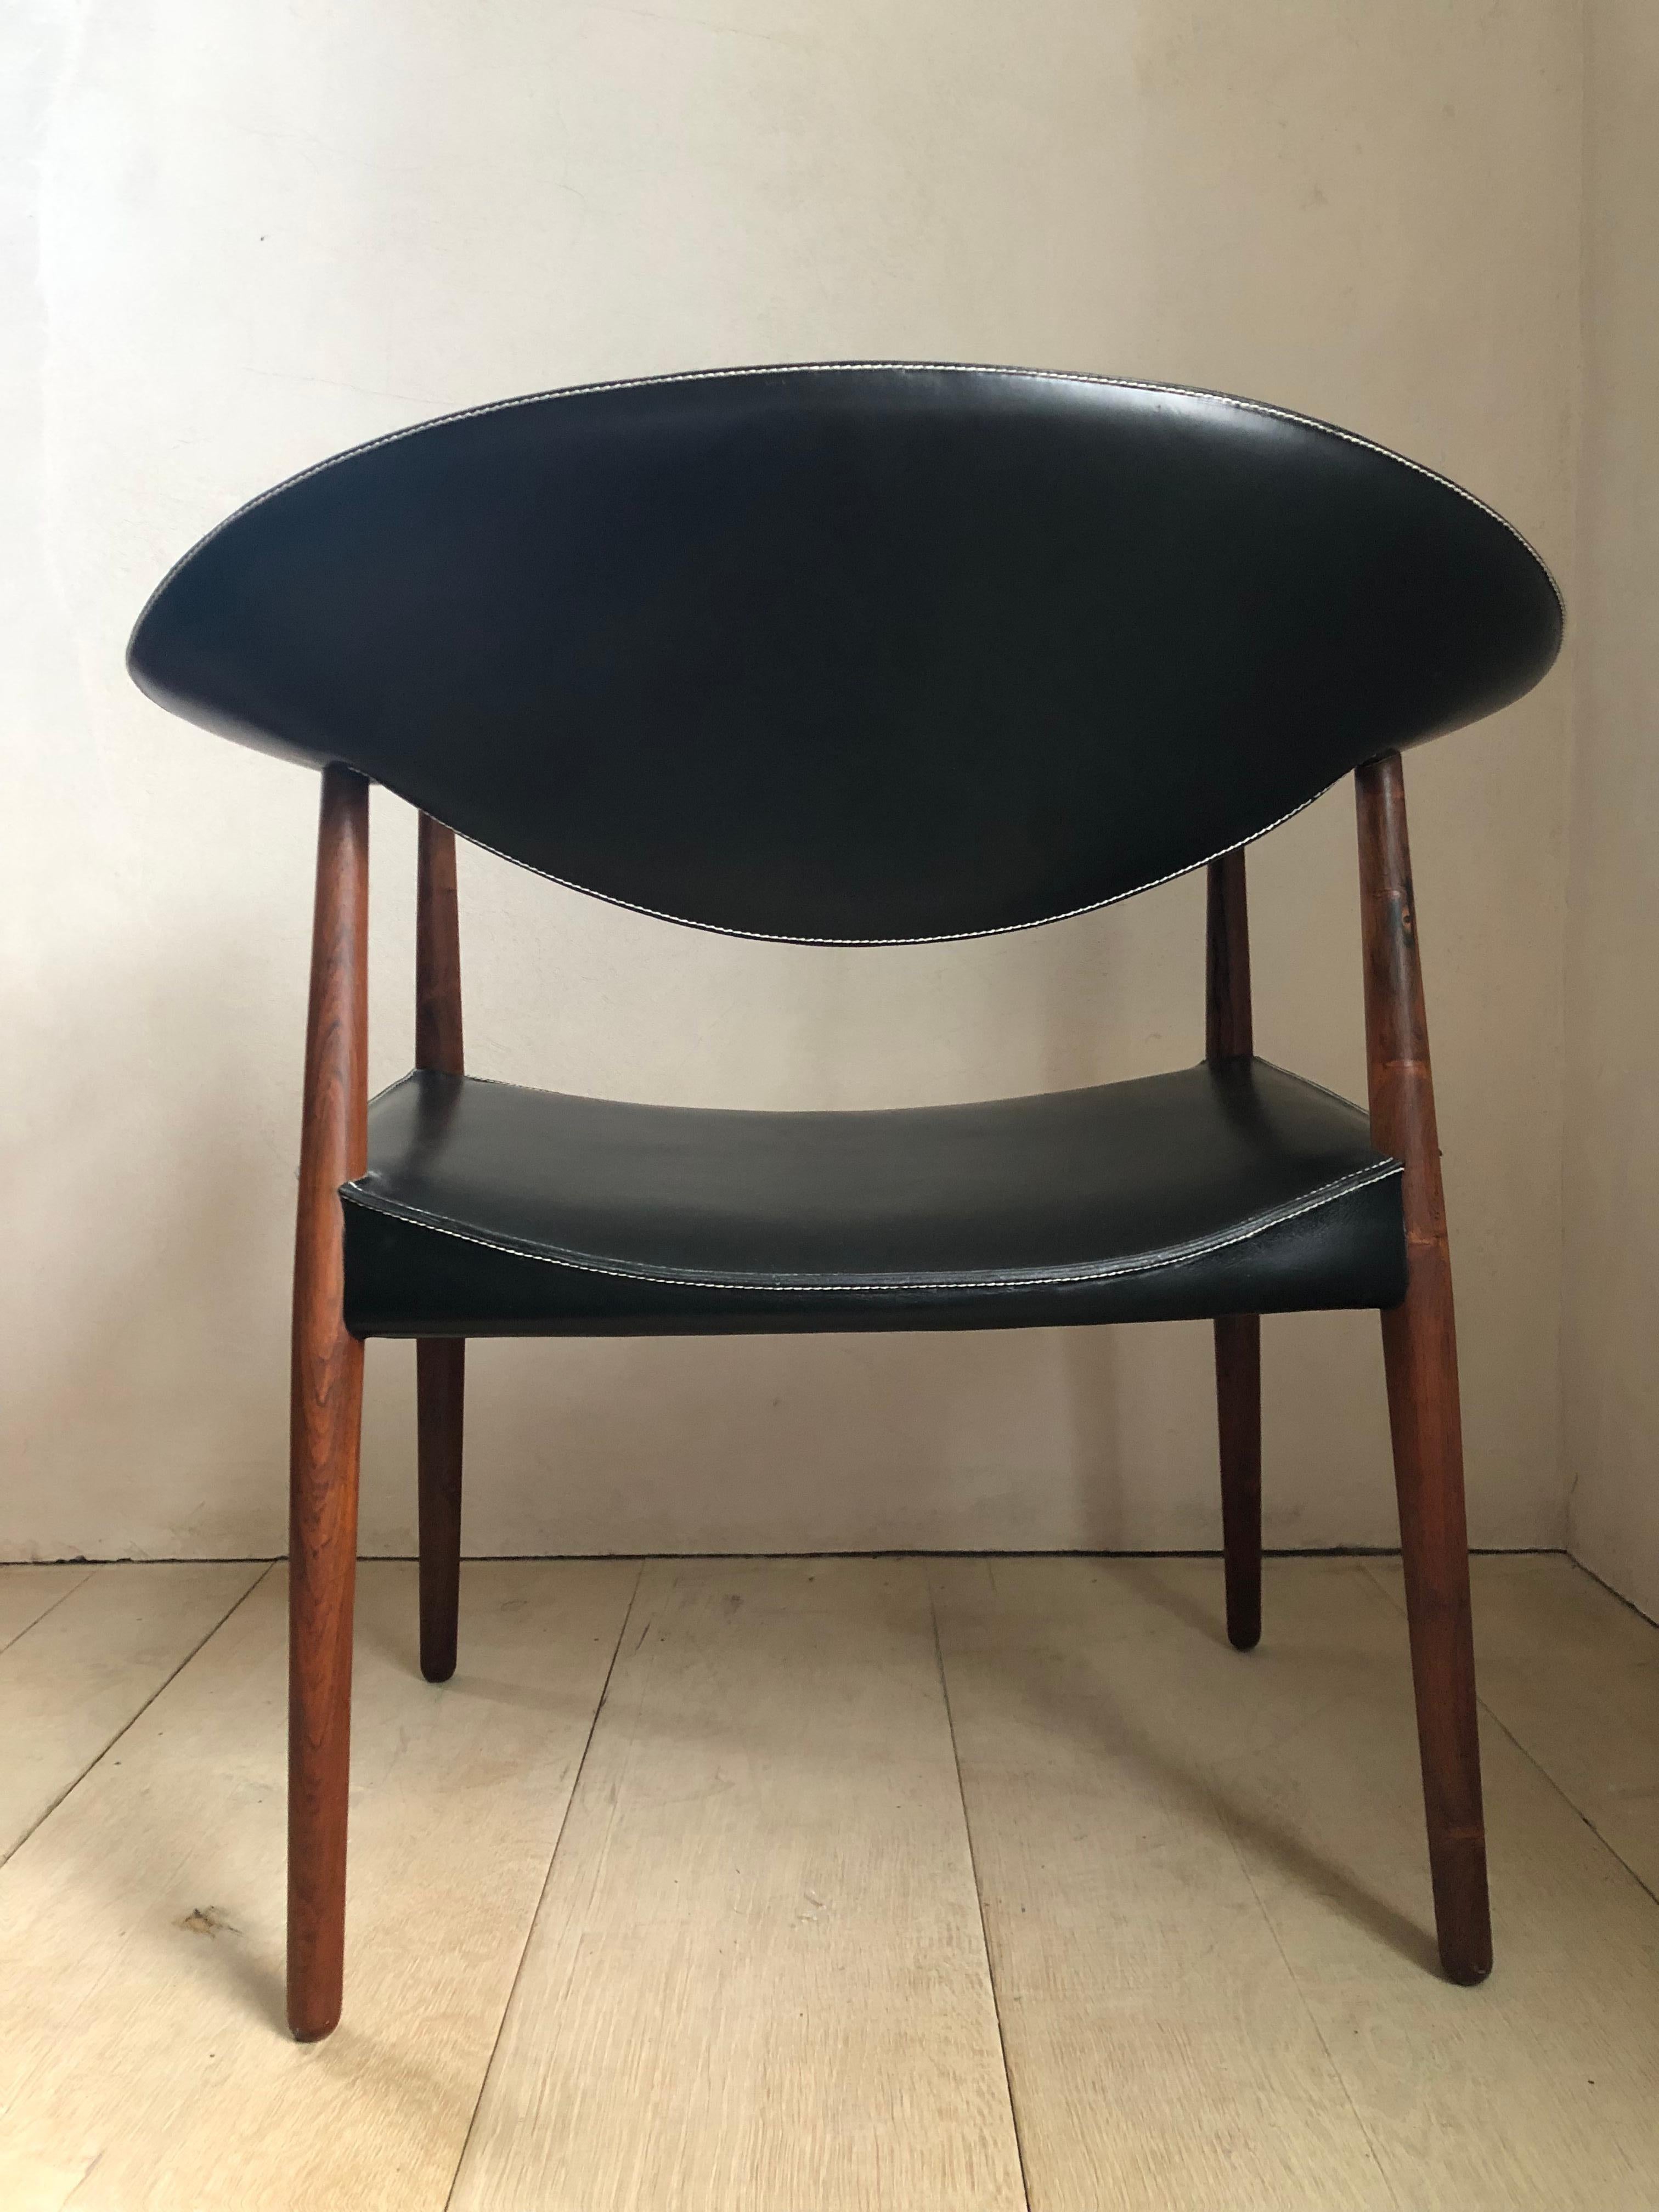 Mid-20th Century Metropolitan Chair by Ejnar Larsen and Aksel Bender Madsen, circa 1960 For Sale